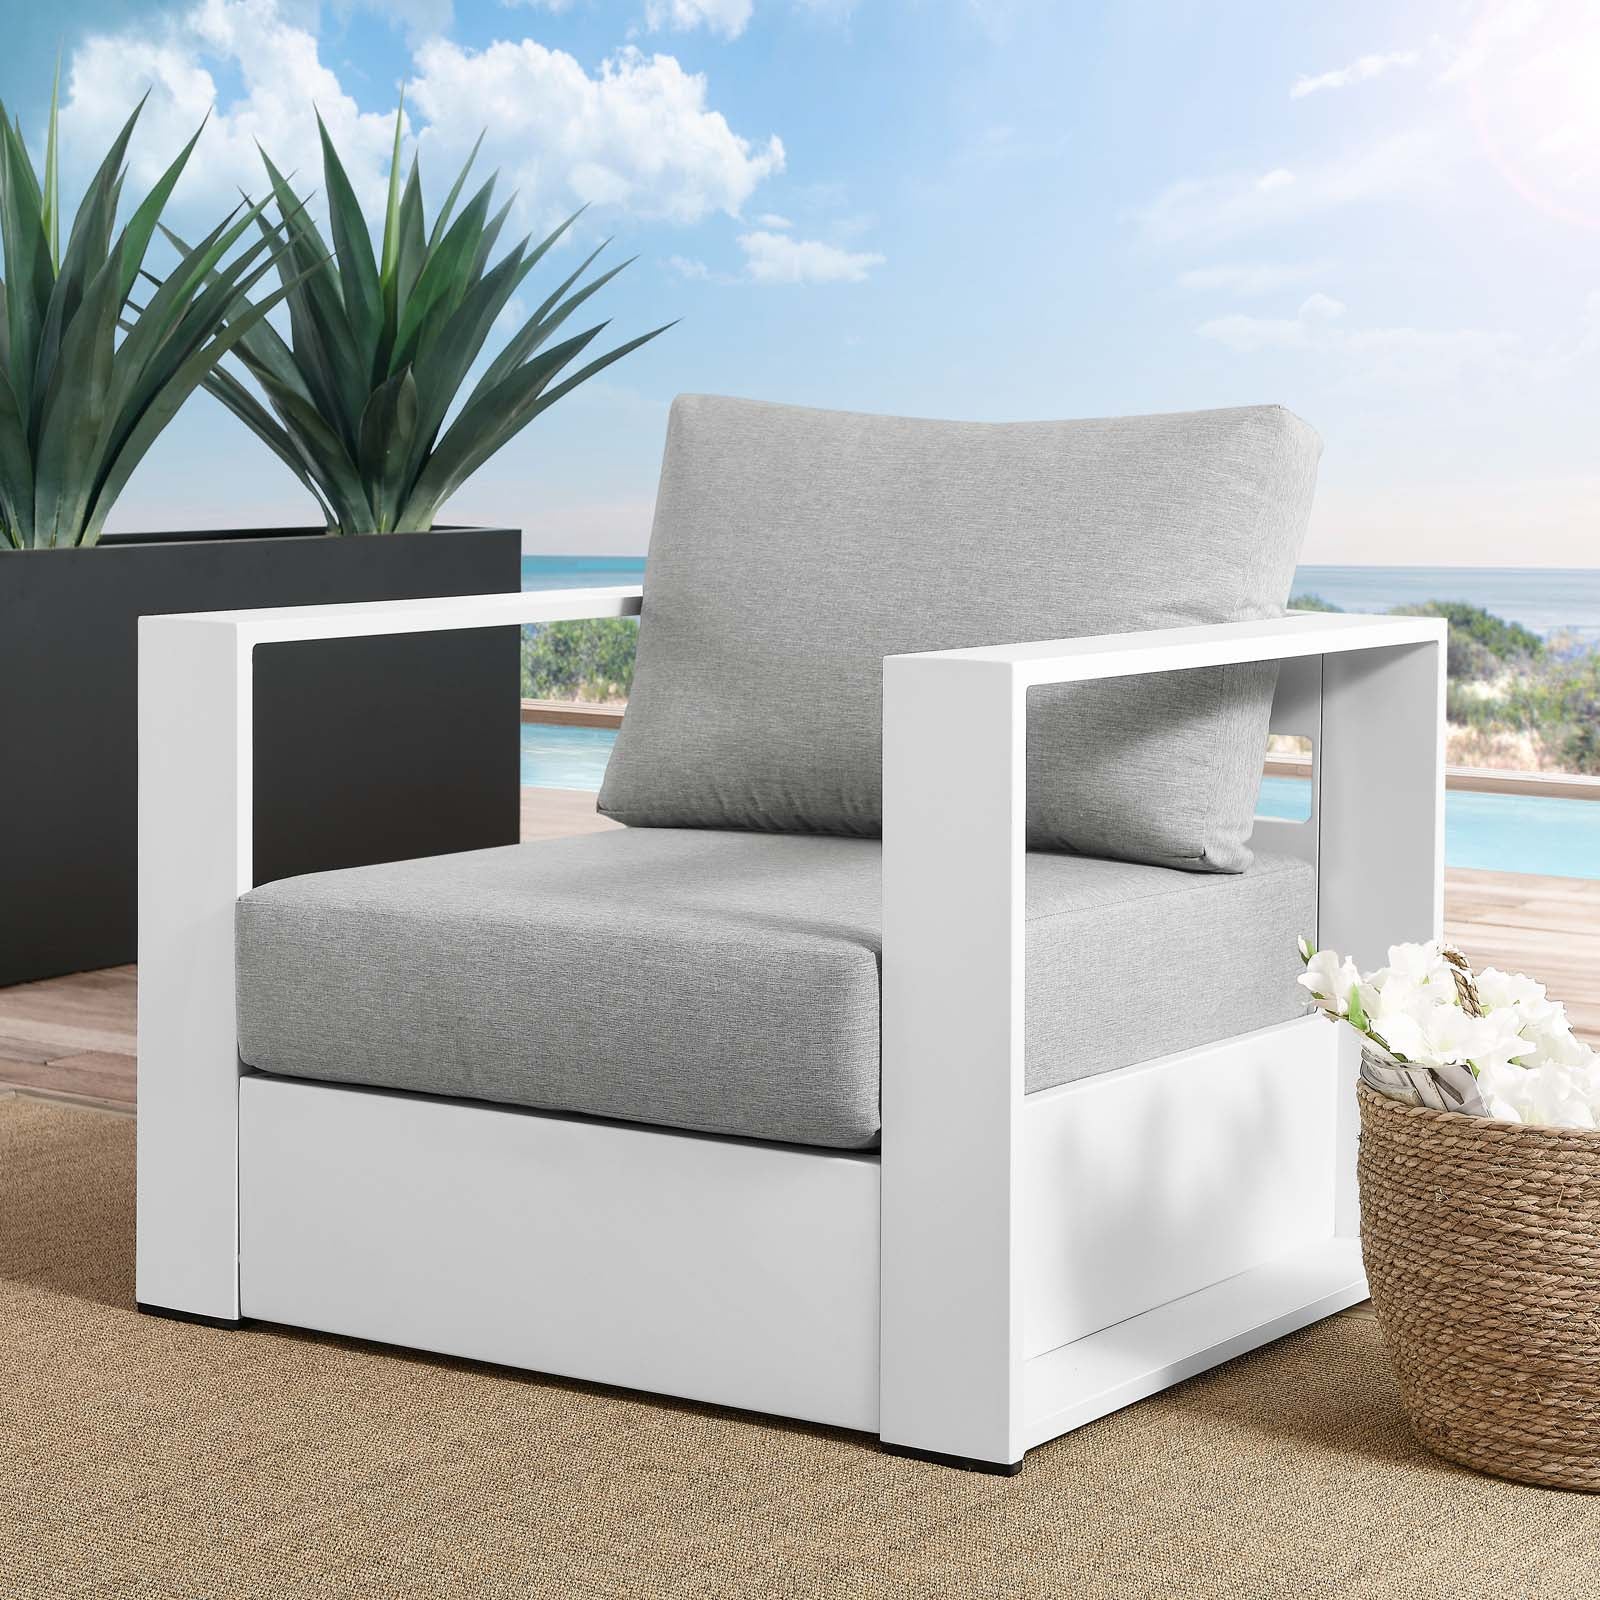 Brentwood Outdoor Patio Powder-Coated Aluminum Armchair